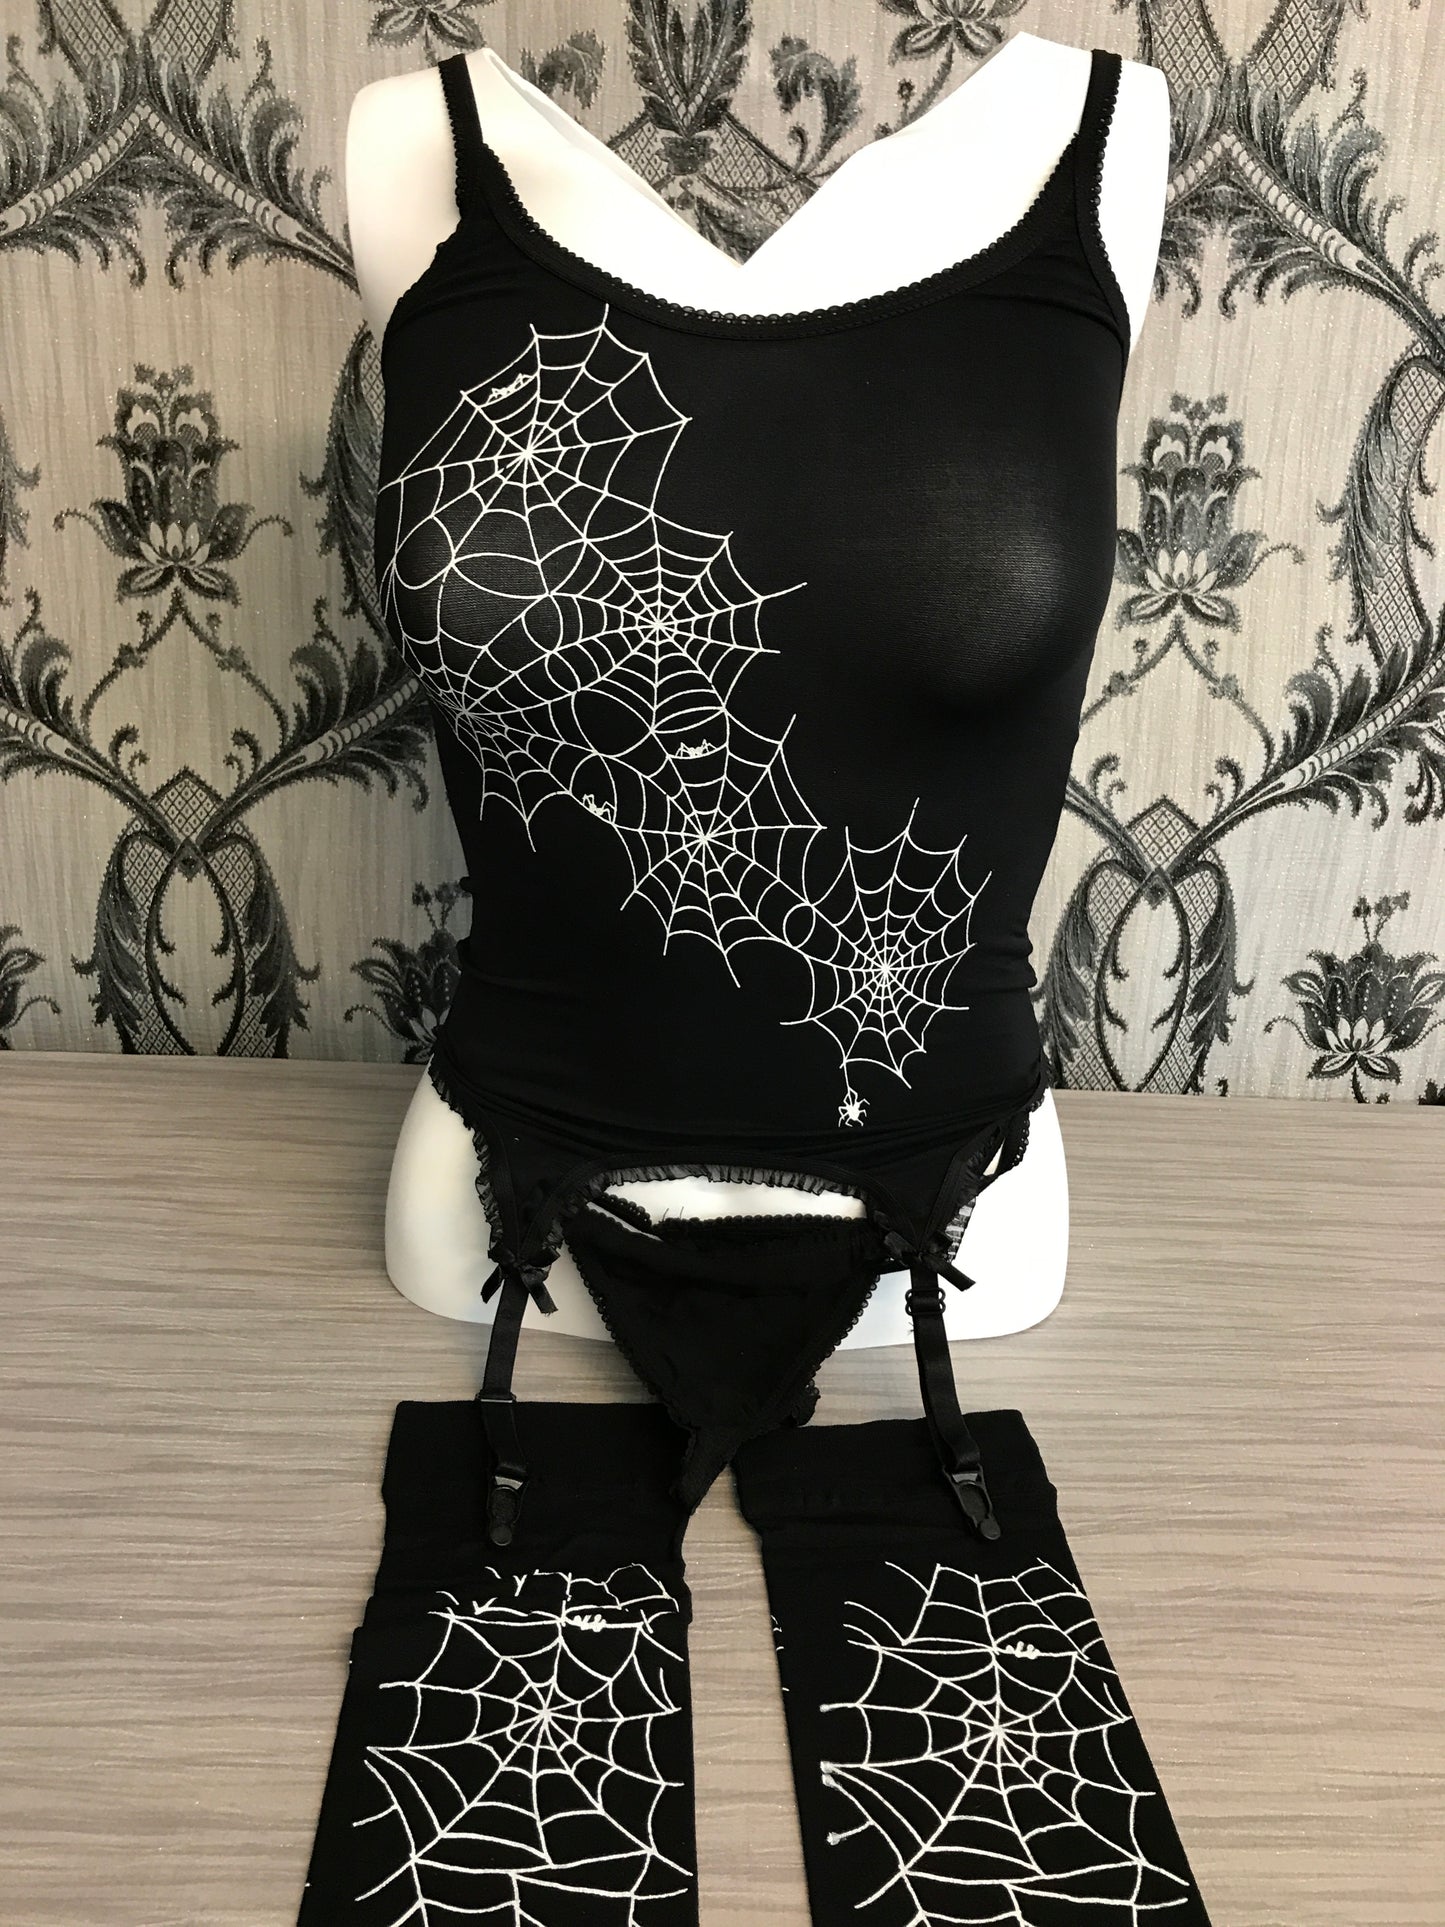 ML2117 Music Legs Spiderweb Top and Thigh High Set